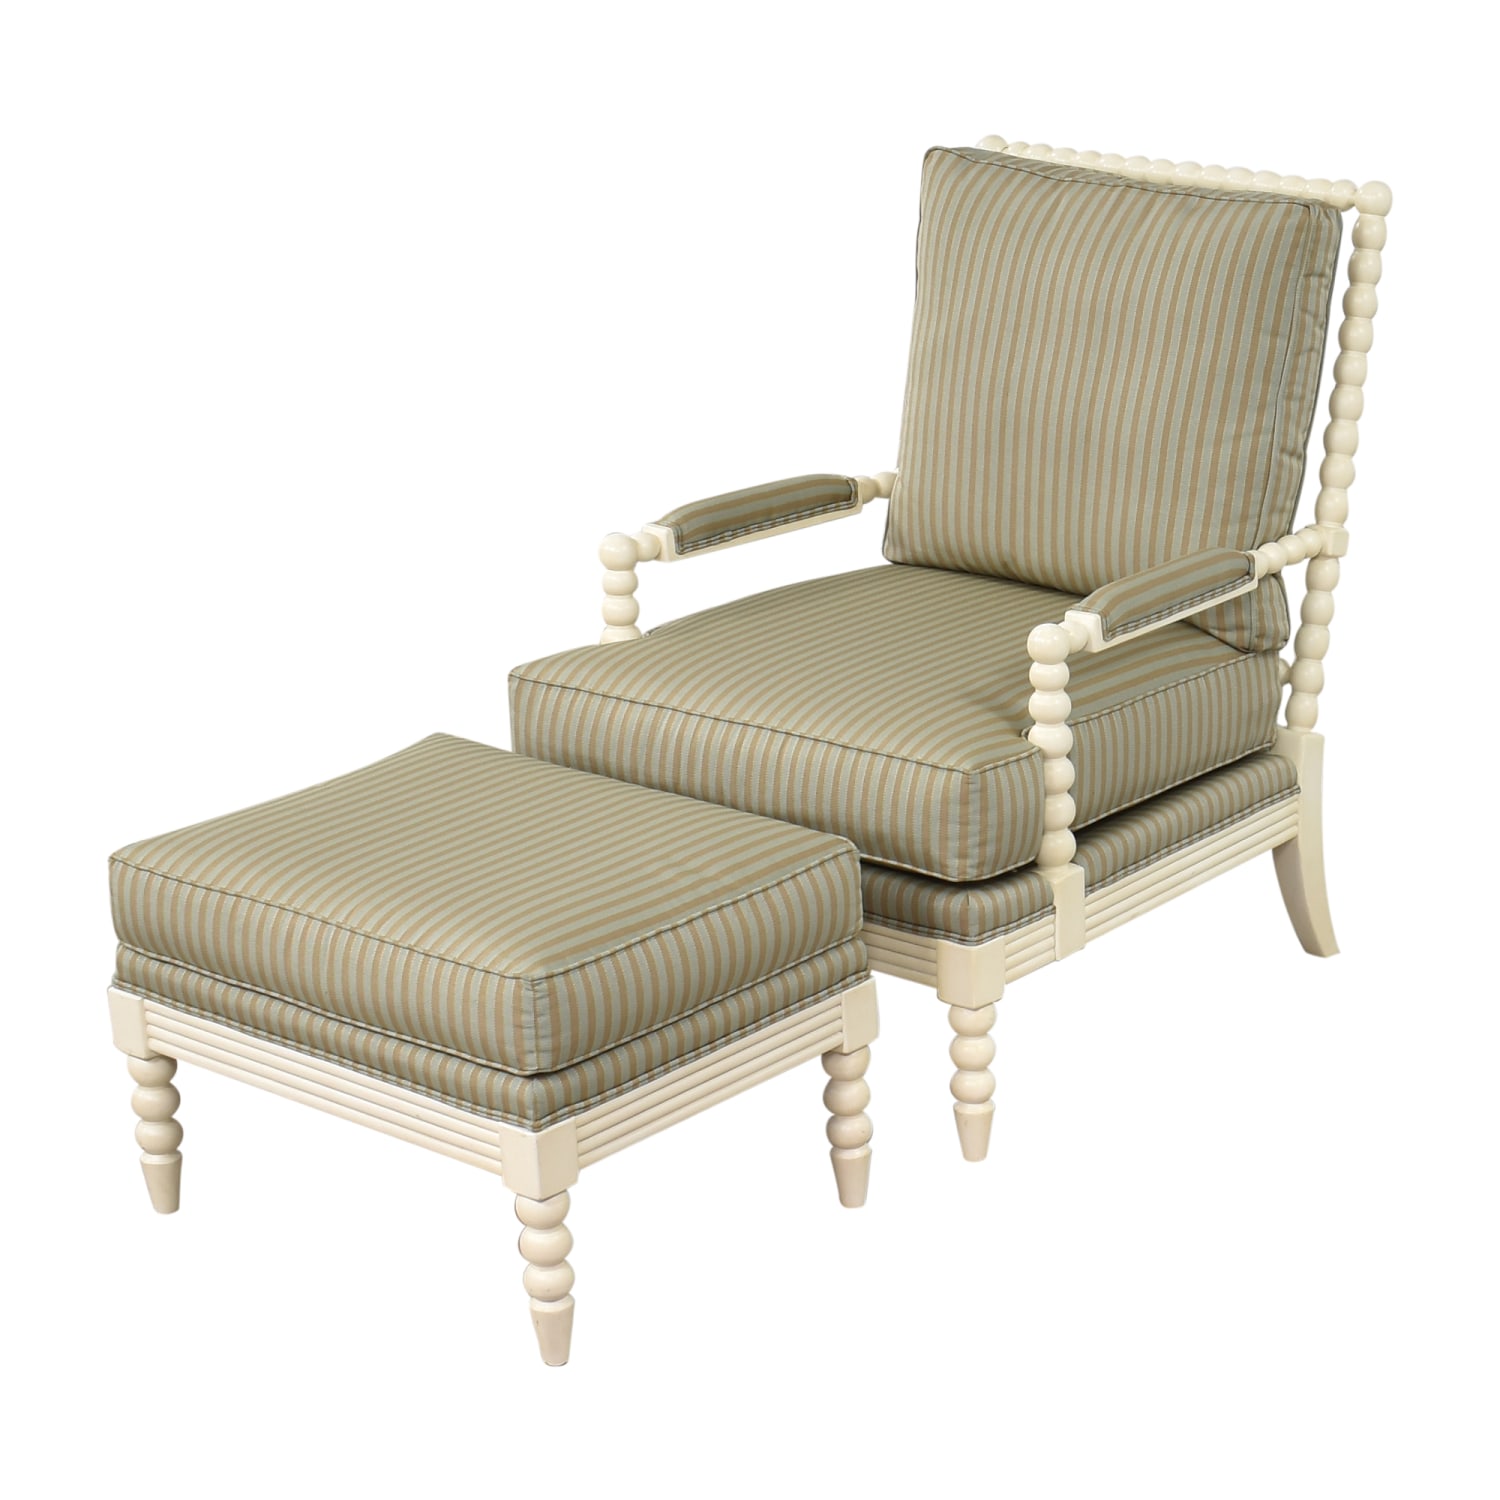 Ethan Allen Brant Chair and Ottoman, 81% Off